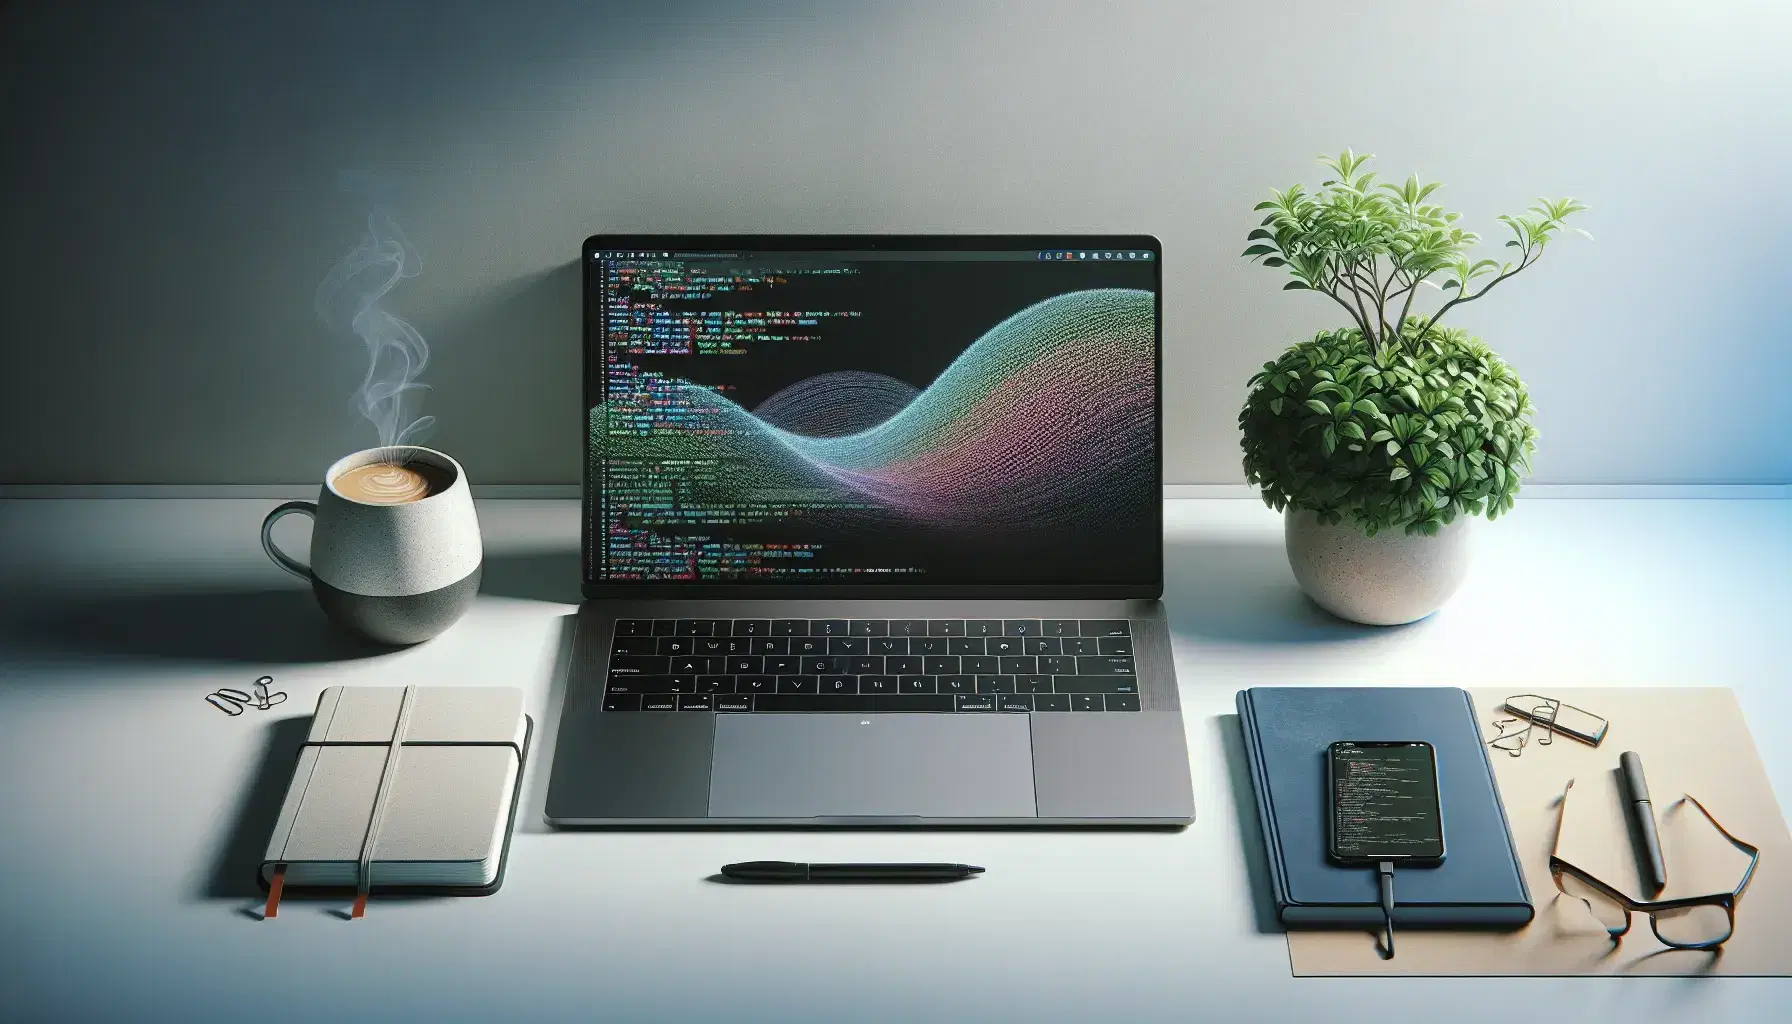 Modern workspace for programming with silver laptop, cup of coffee, green plant and glasses on white desk and gray wall.